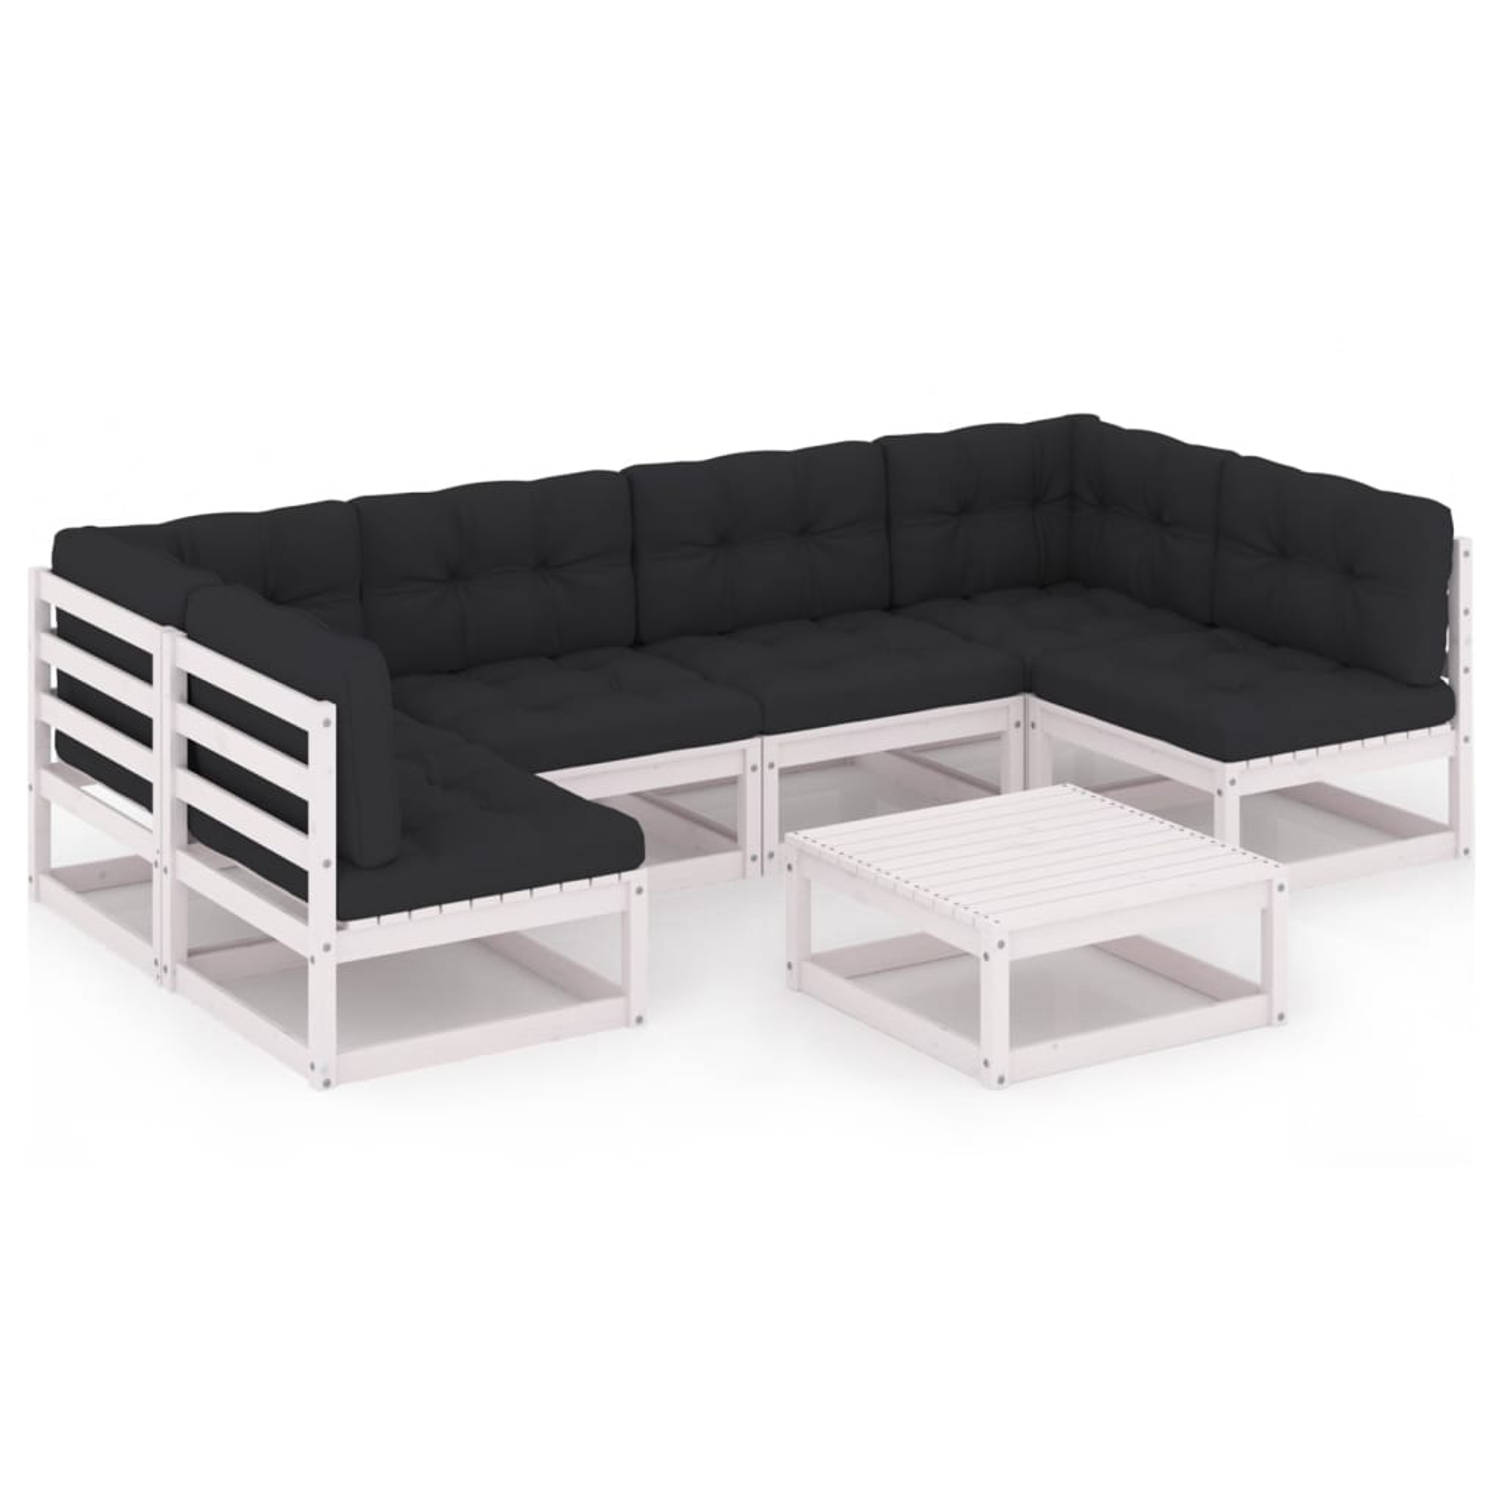 The Living Store 7-delige Loungeset met kussens massief grenenhout wit - Tuinset